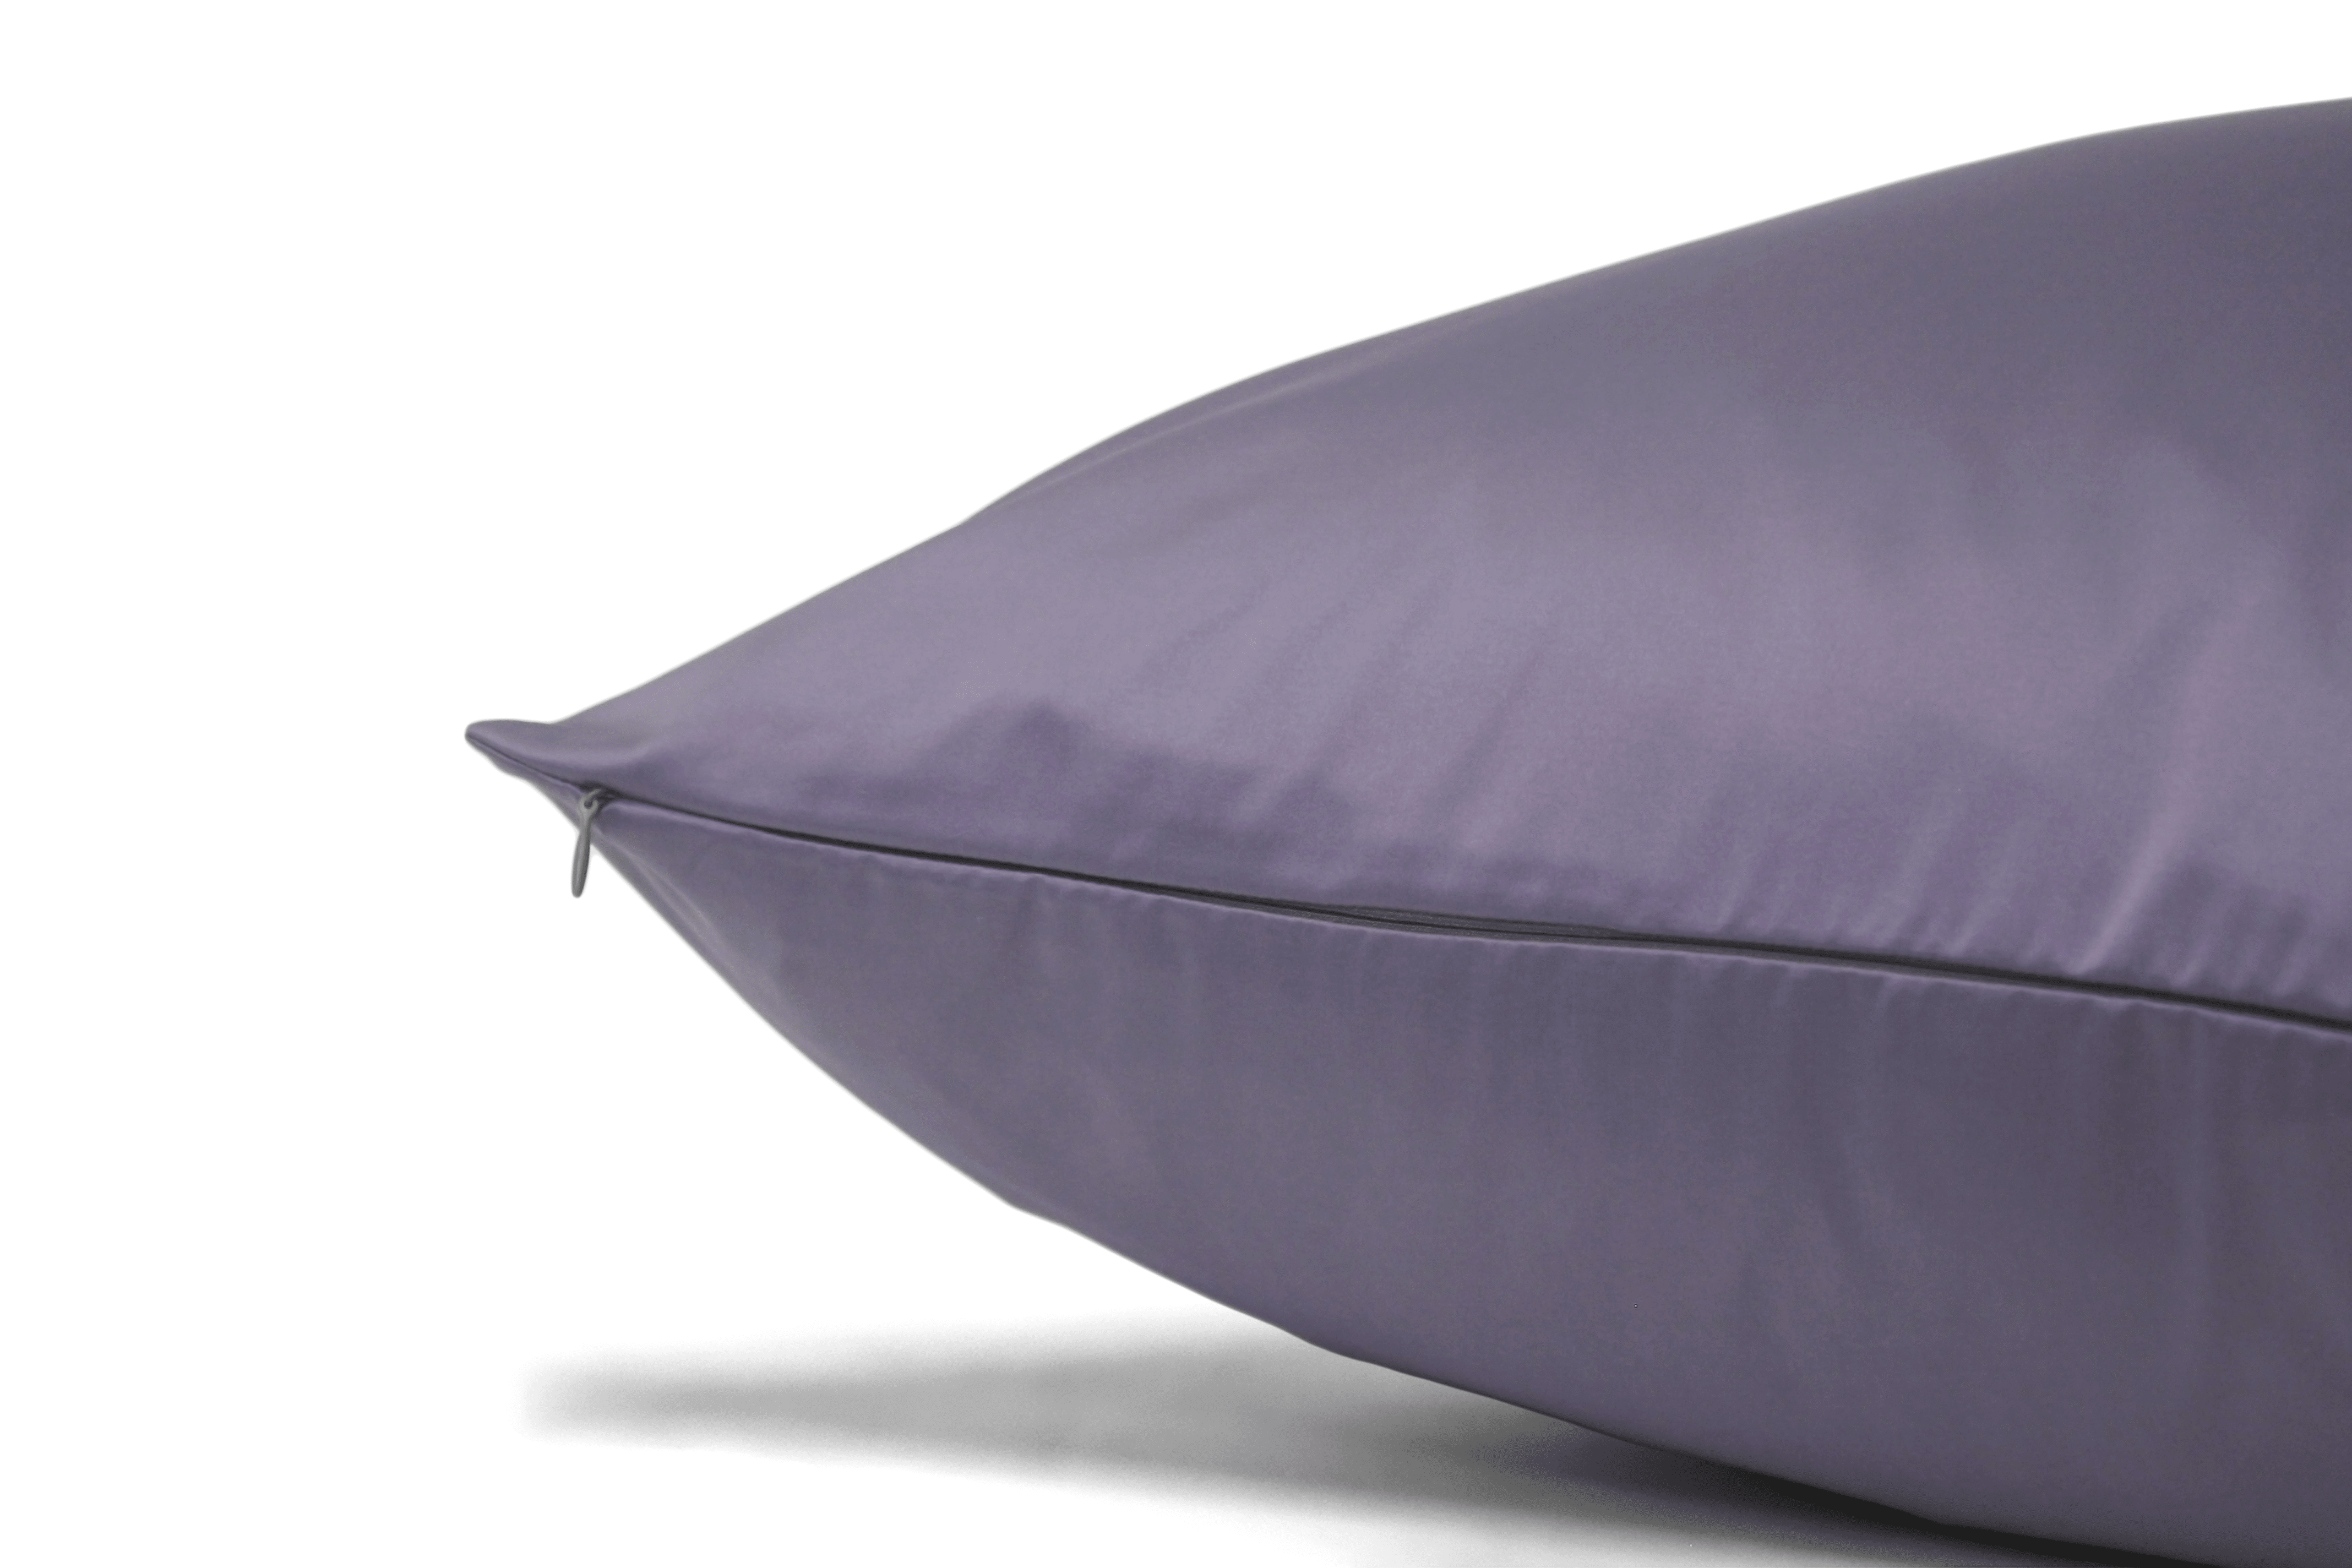 Crocus Cushion Cover Cushion Cover Canadian Down & Feather Company 